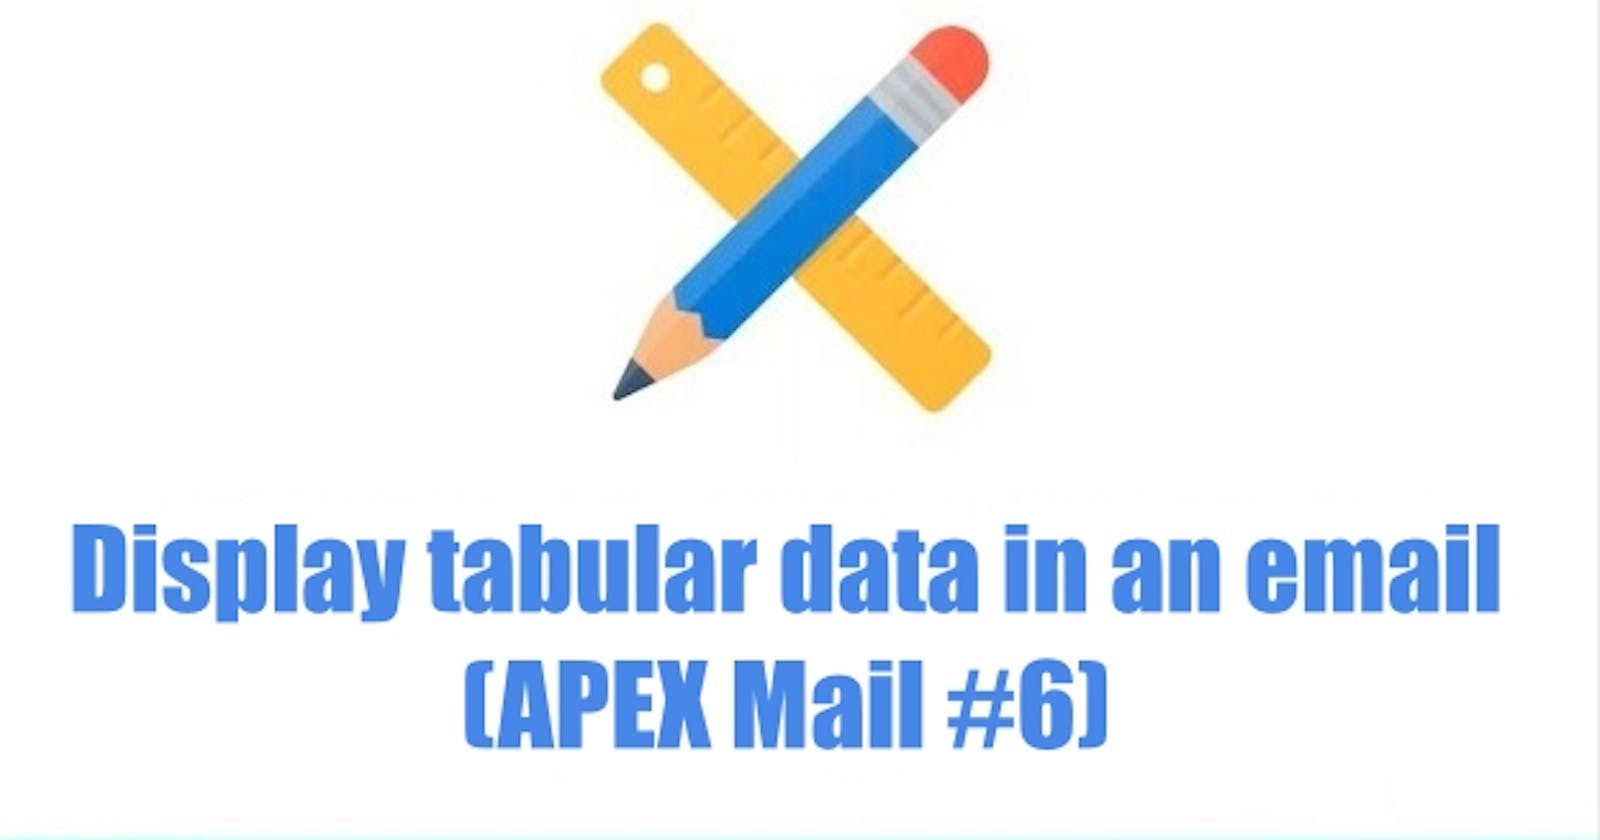 Display tabular data in an email (APEX Mail #6)